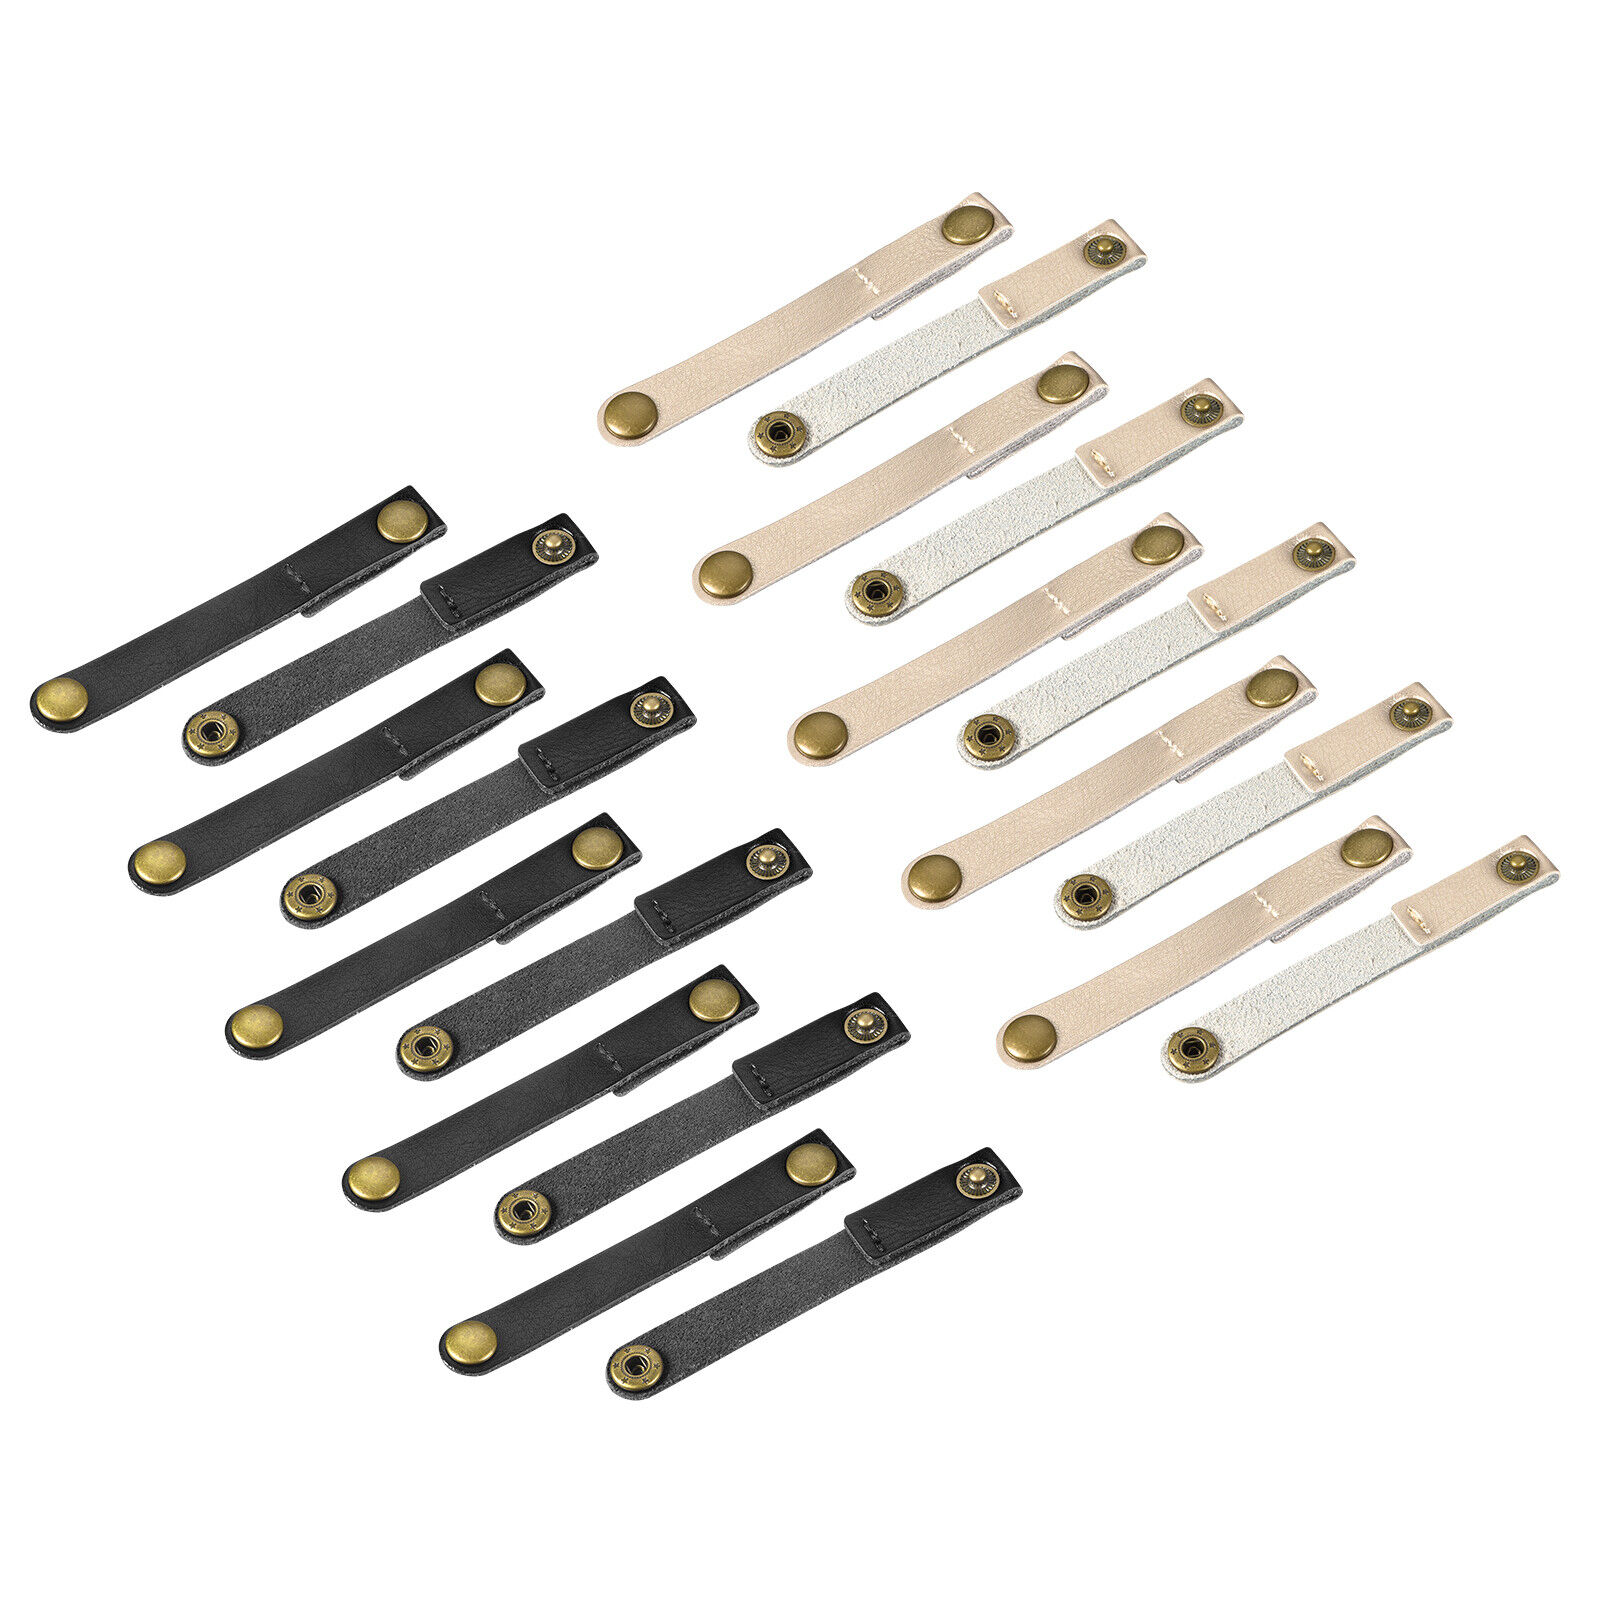 Leather Cable Straps Cable Ties, Cord Organizer, Black/Golden, 20pcs